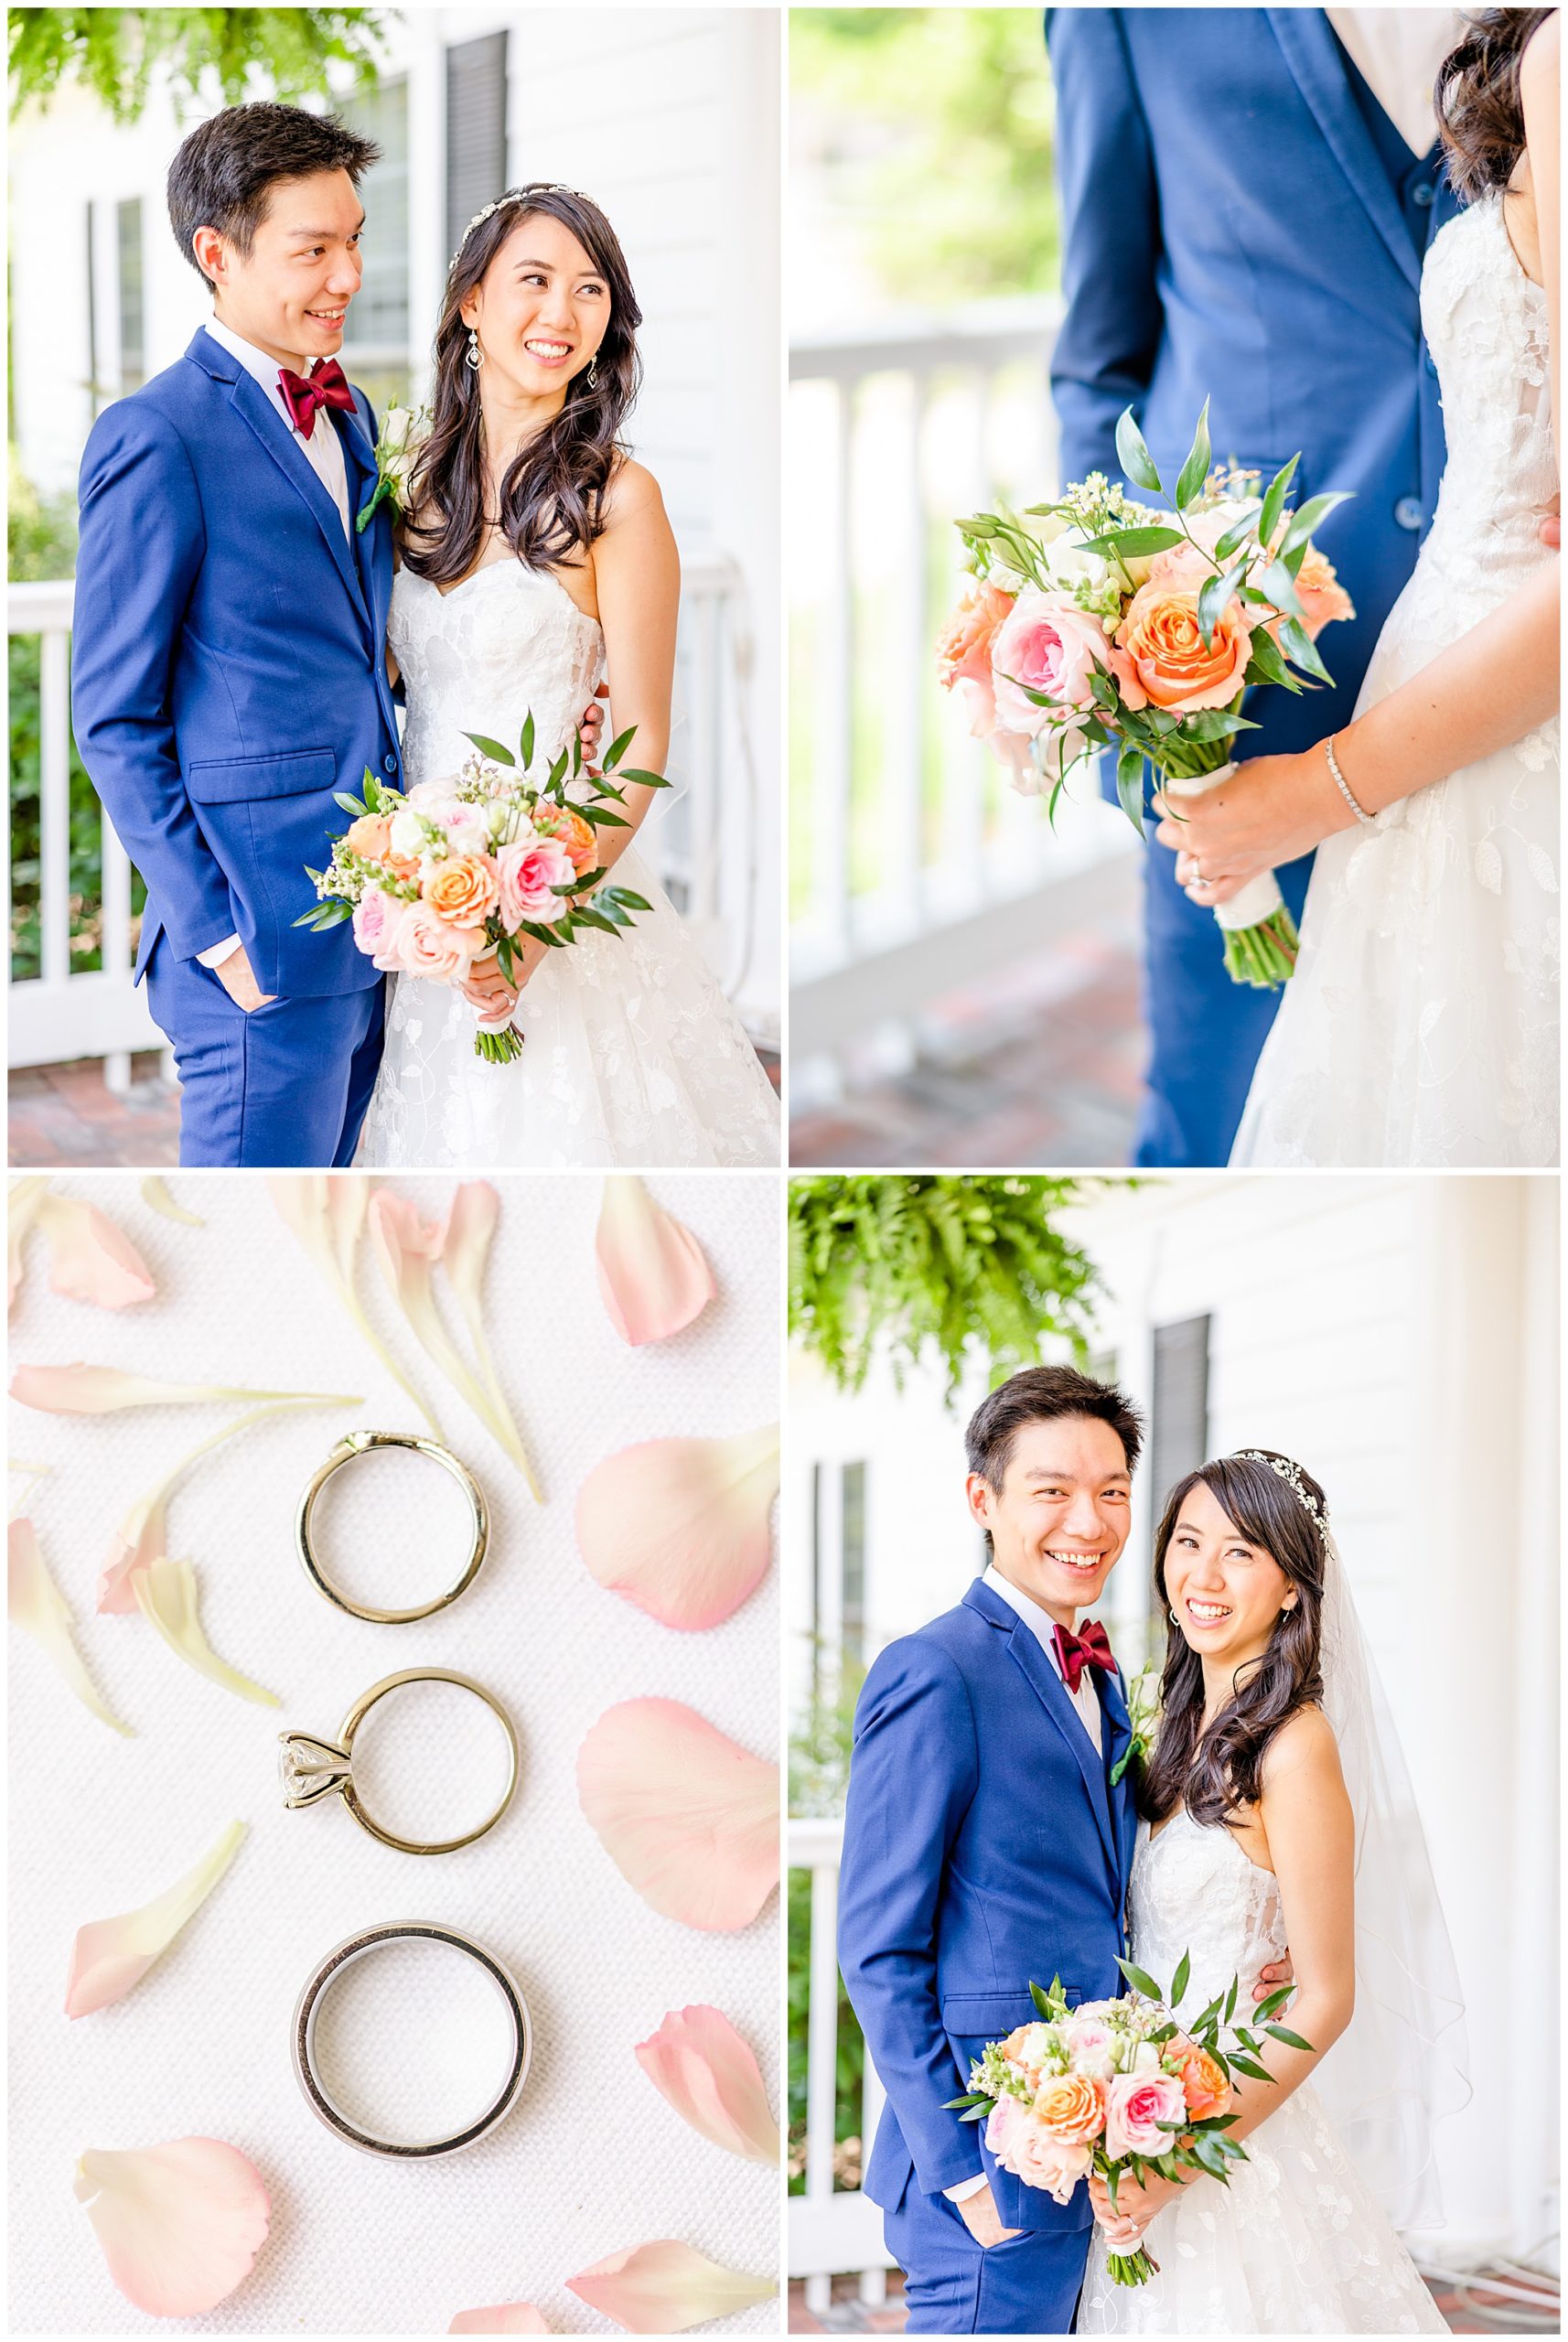 spring Westfields Golf Club wedding, Clifton Virginia wedding, northern Virginia wedding venue, DC wedding photographer, DC photographer, Virginia country club wedding, spring wedding aesthetic, Chinese American wedding, Rachel E.H.Photography, wedding rings surrounded by flower petals, bouquet by Blooming Spaces